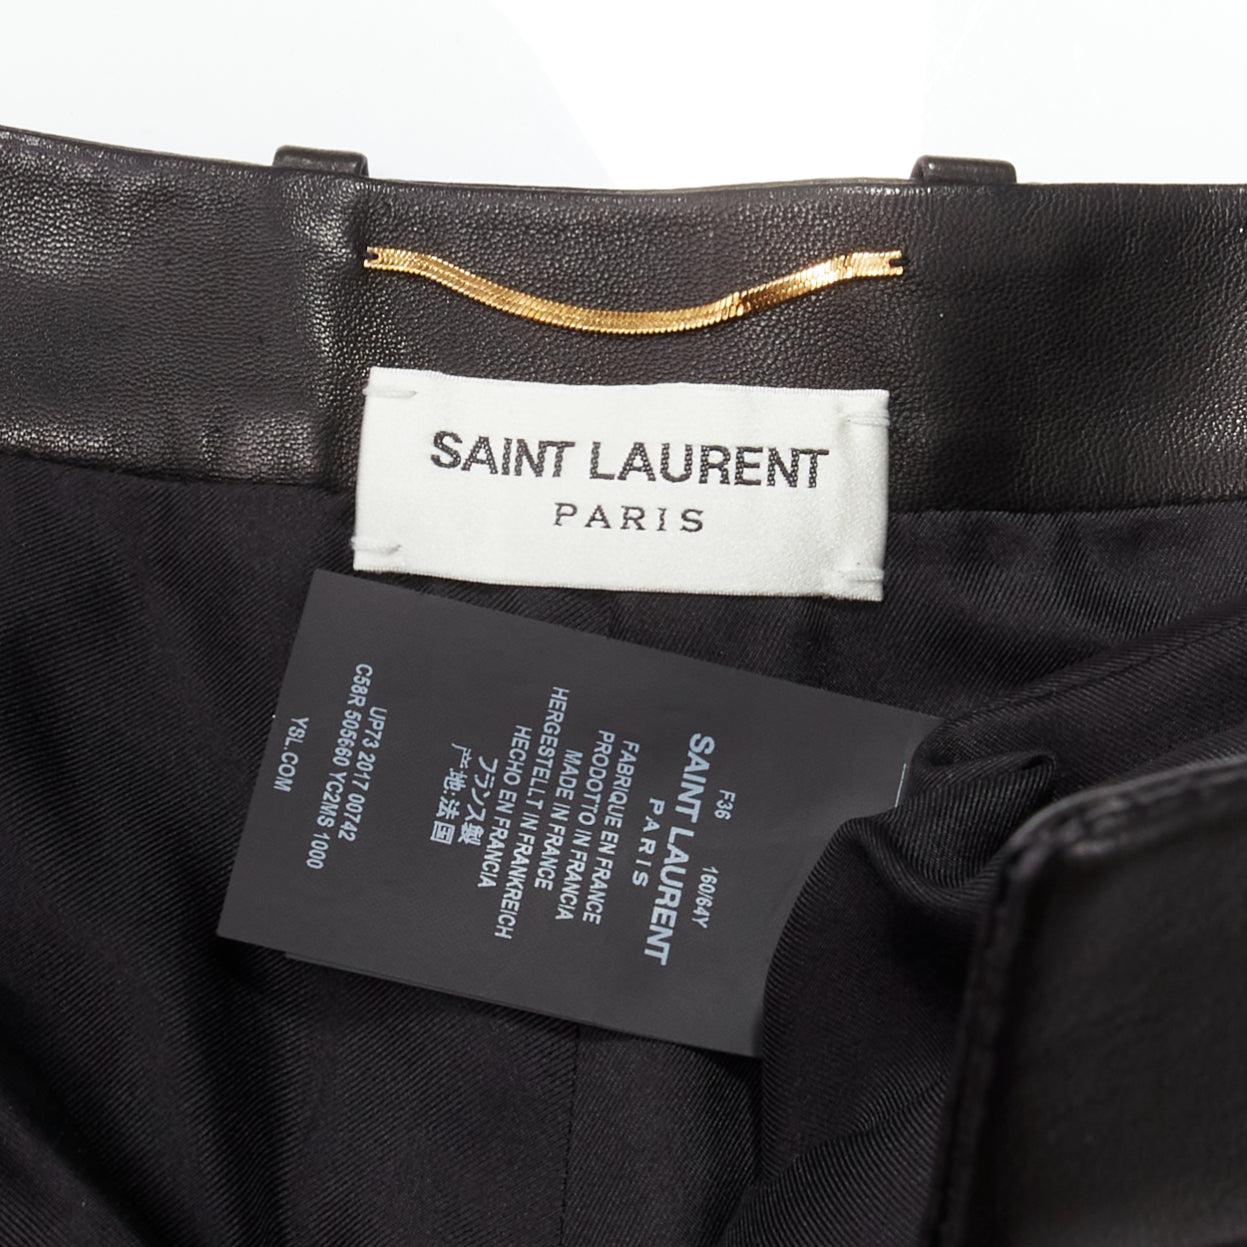 SAINT LAURENT 2017 black lambskin leather high waisted cuffed shorts FR36 S For Sale 4